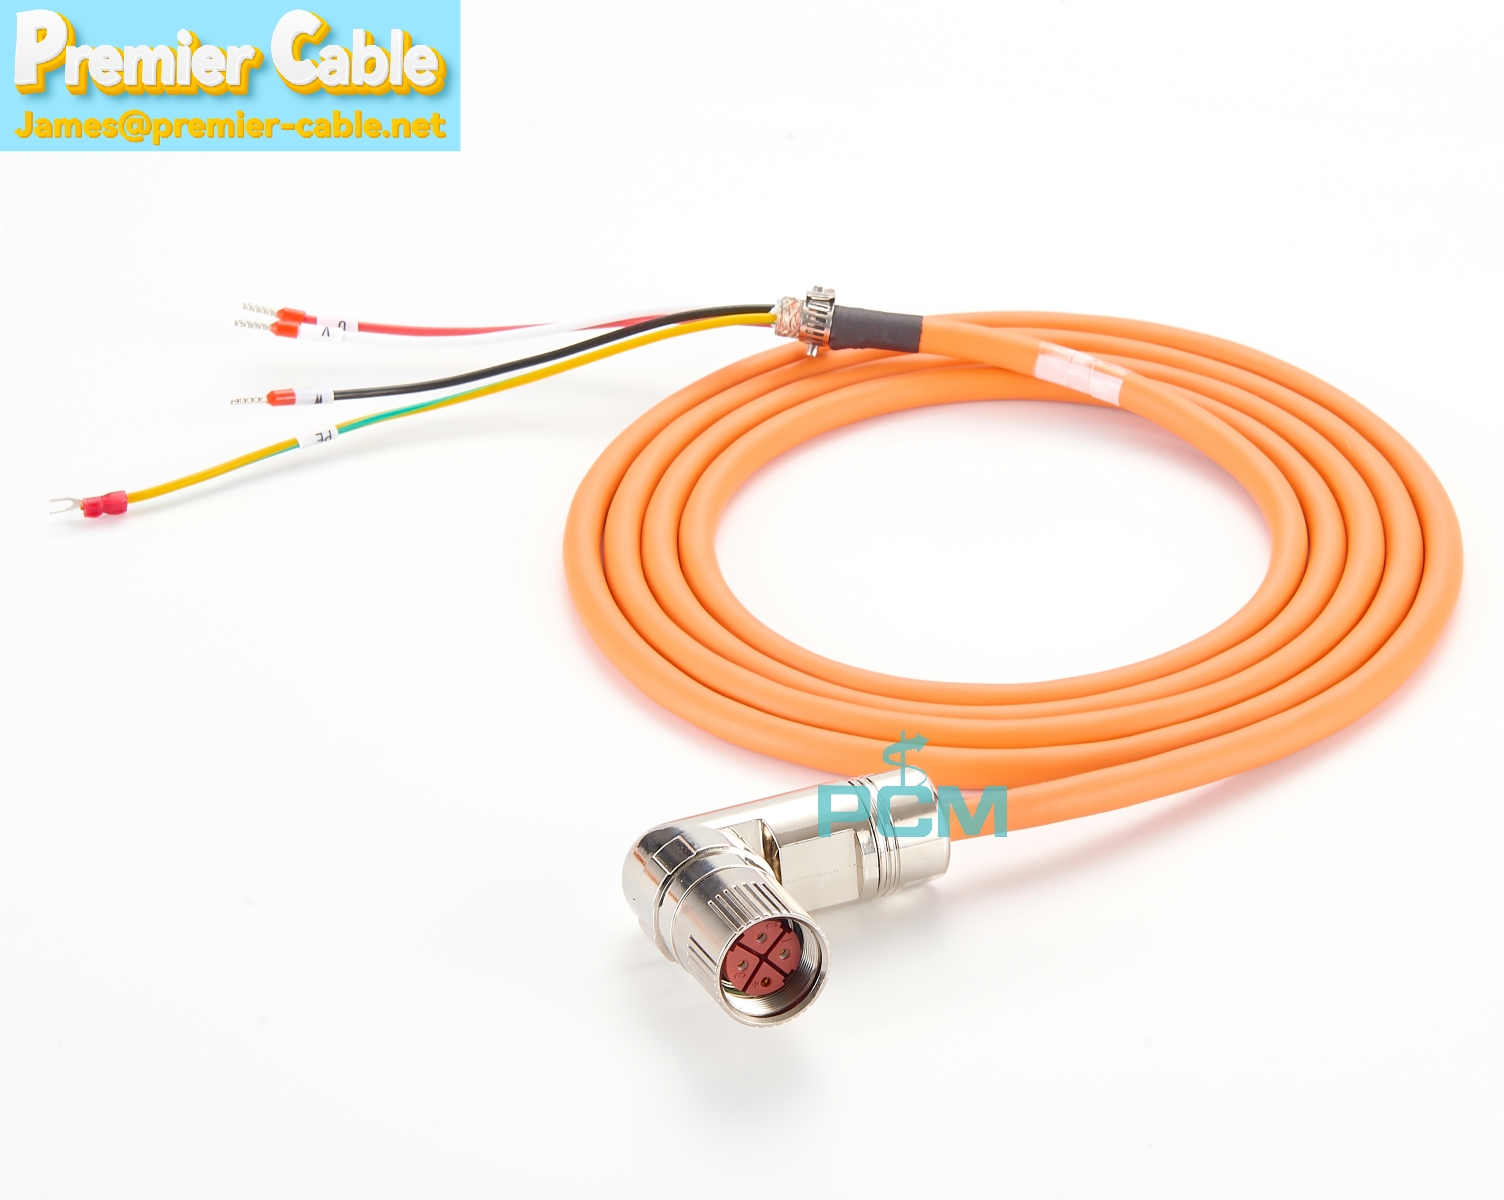 Power cable pre-assembled for V90 servo motor with M23 4 Pin connector